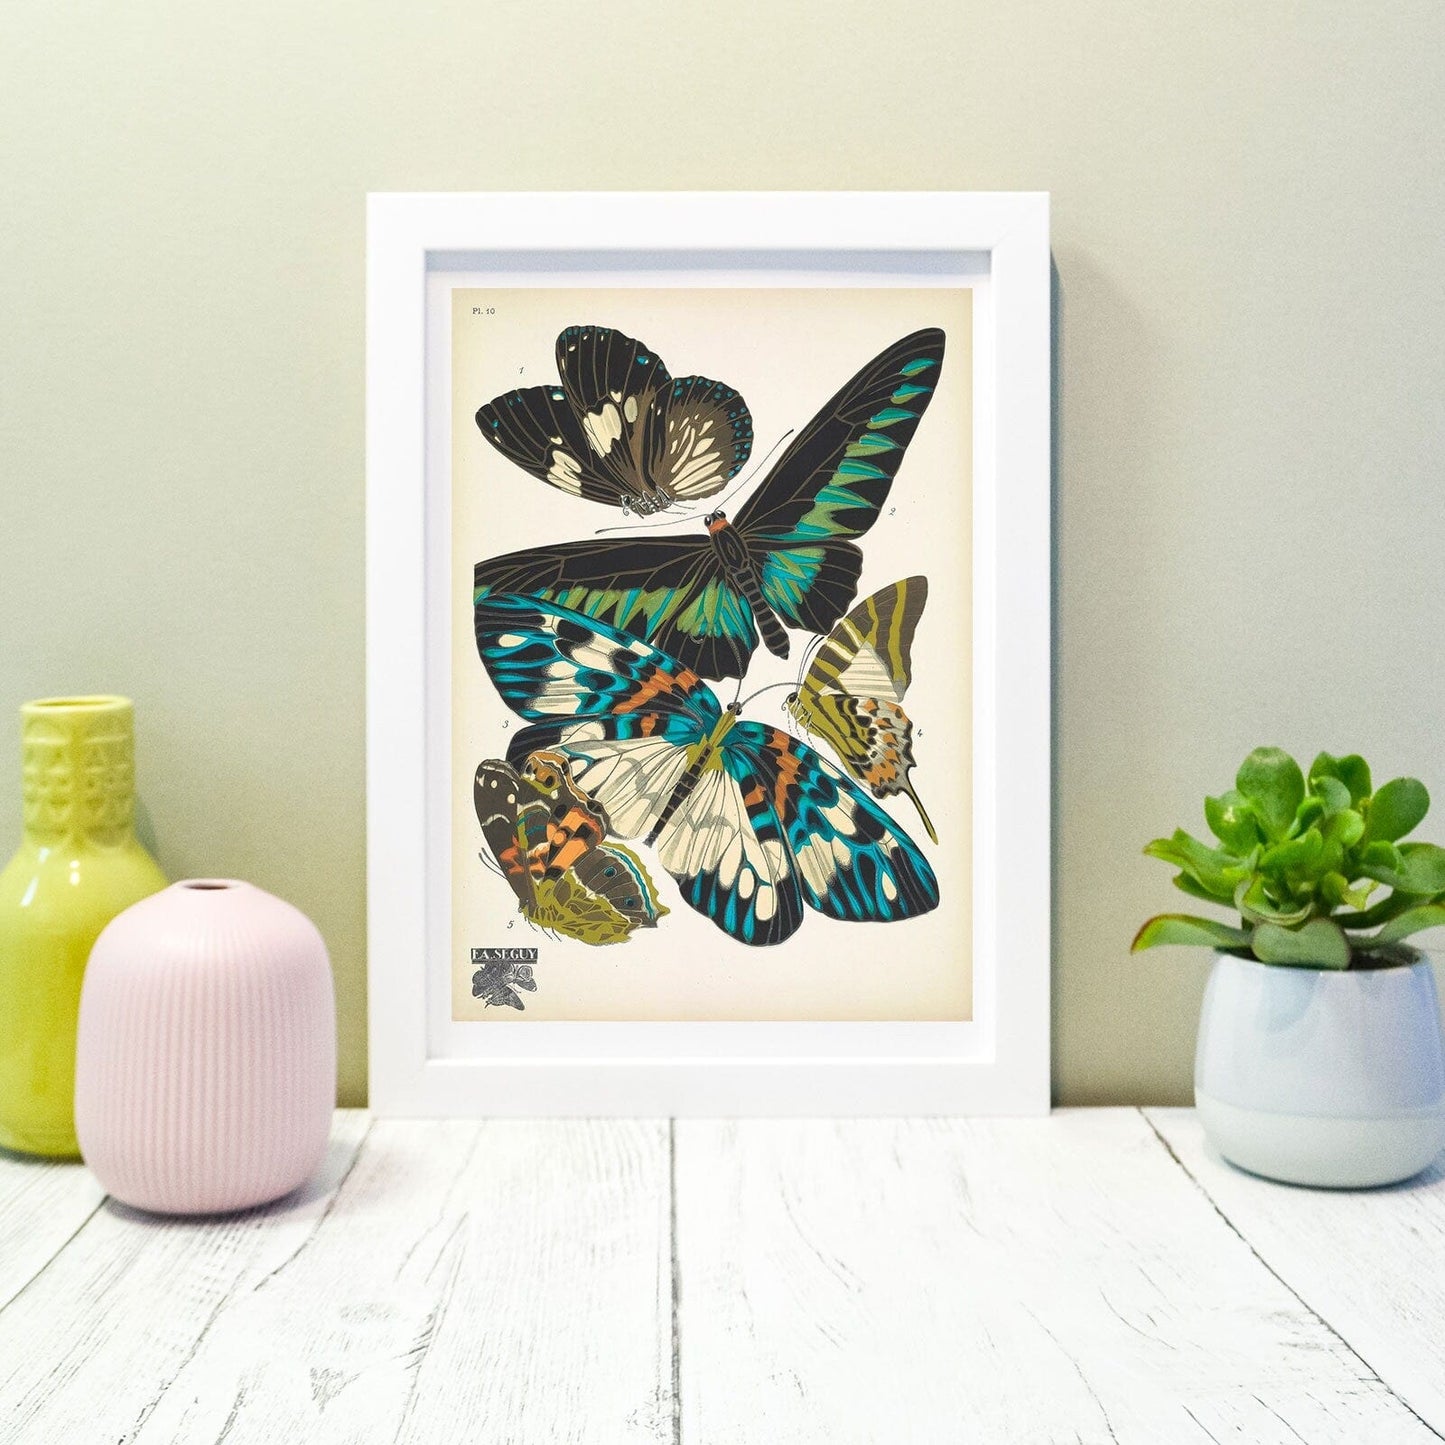 Framed Vintage Butterfly Print, Natural history butterflies Poster, butterfly Wall Art Print 5 of 16 Vintage Animal Prints